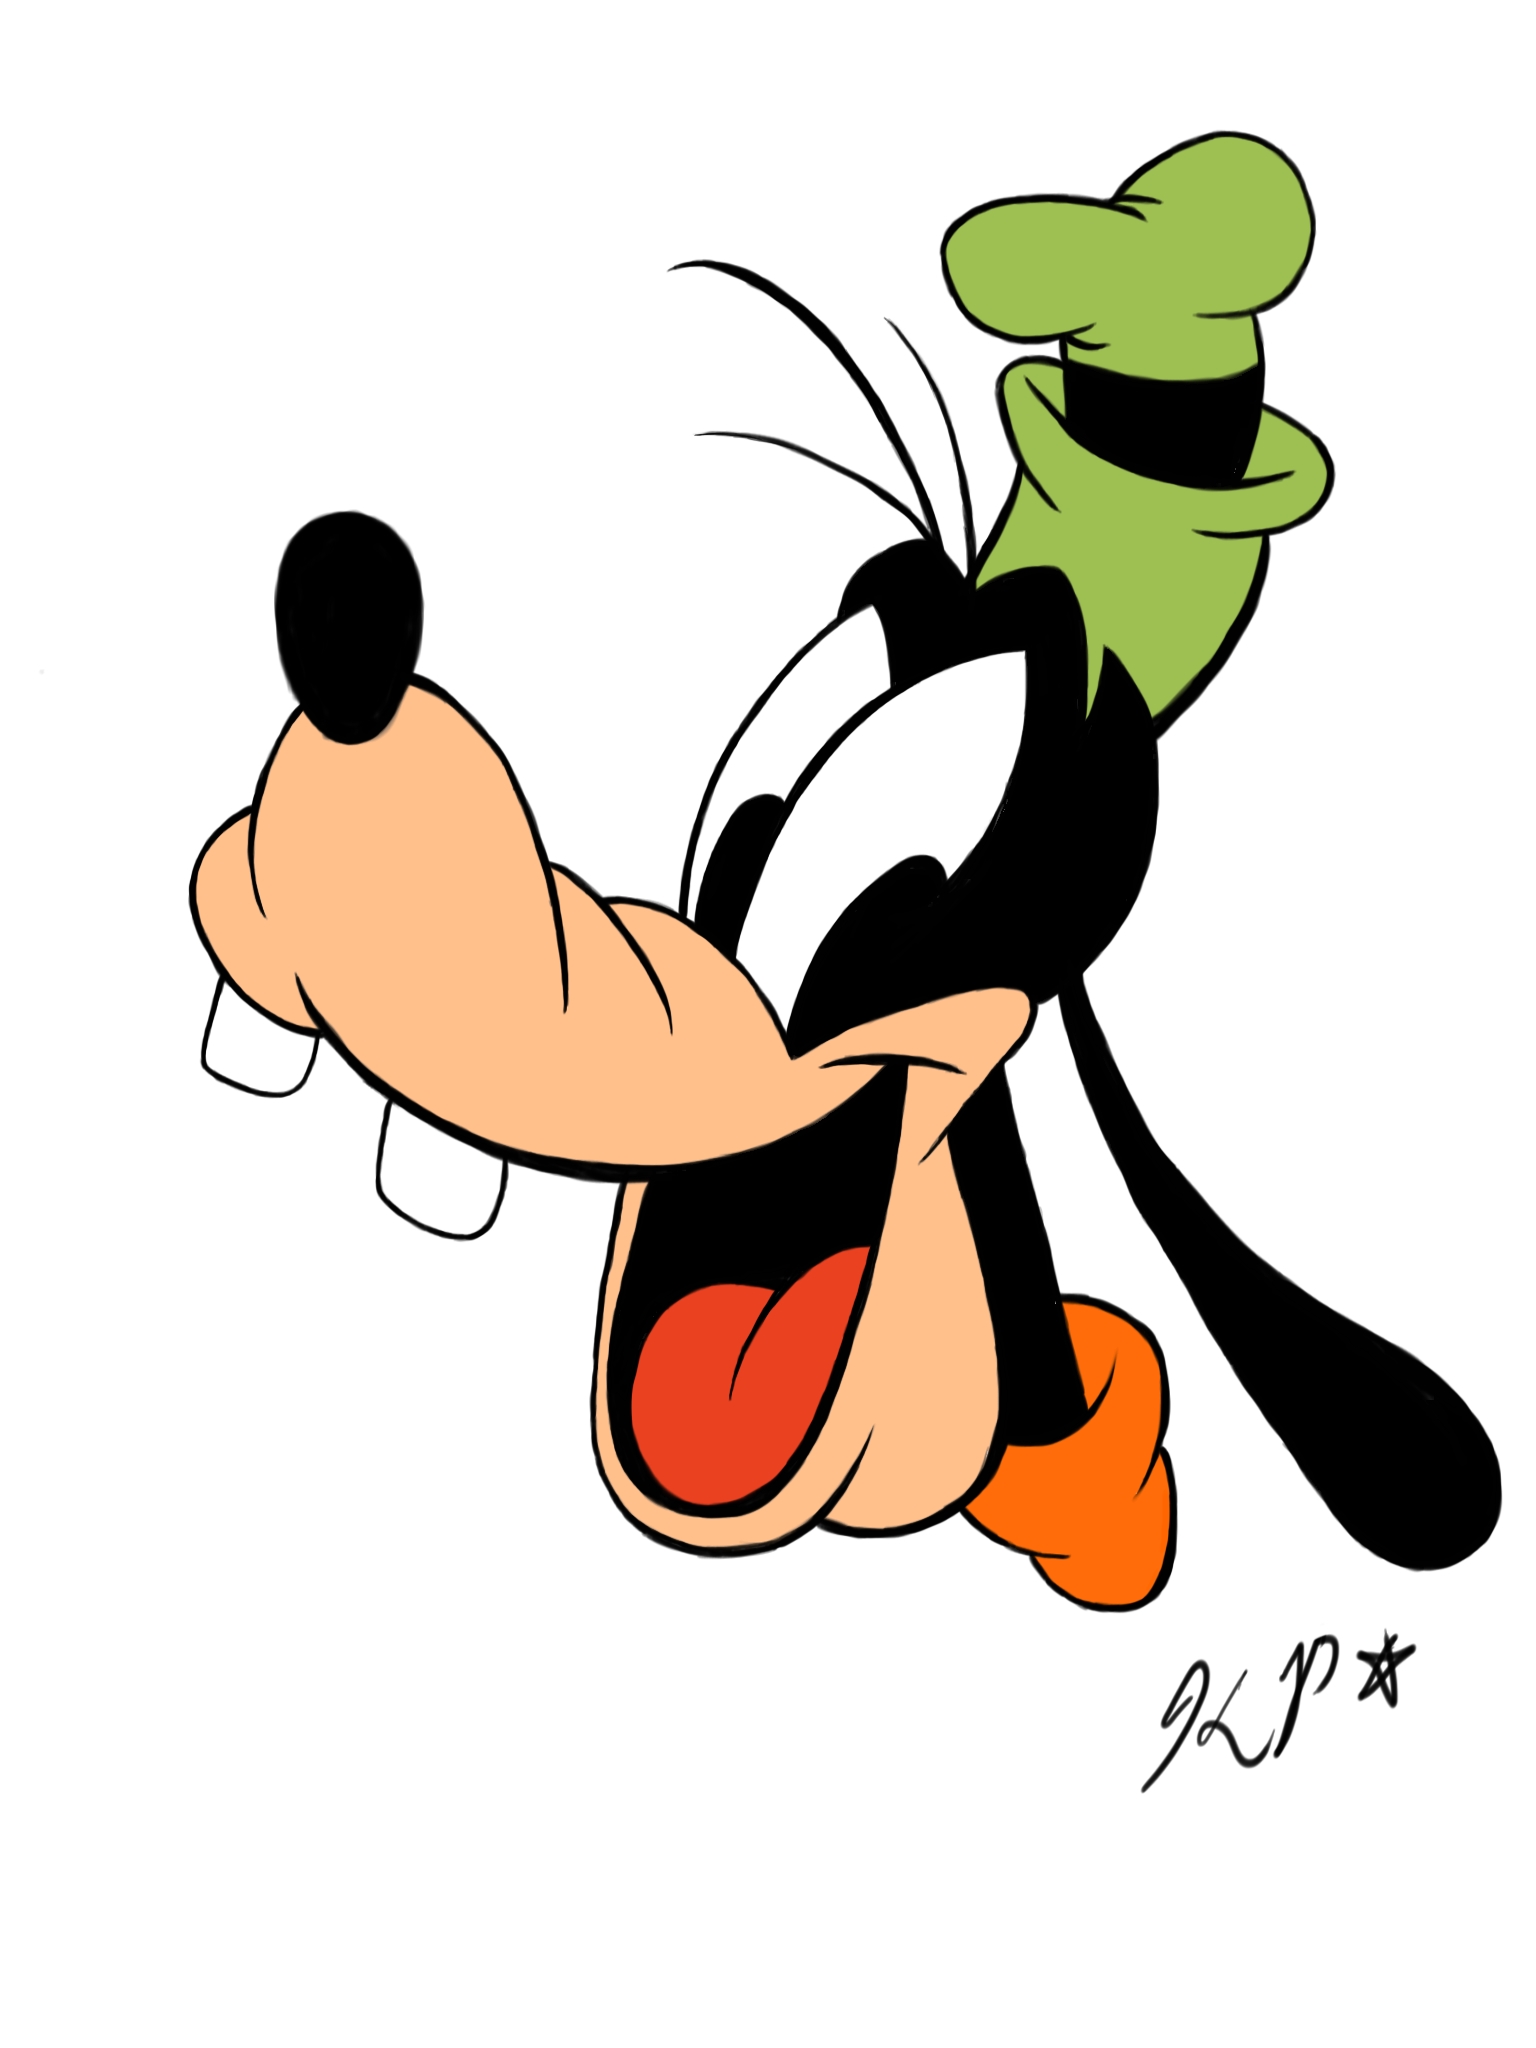 Free Goofy Cartoon Face, Download Free Goofy Cartoon Face png images